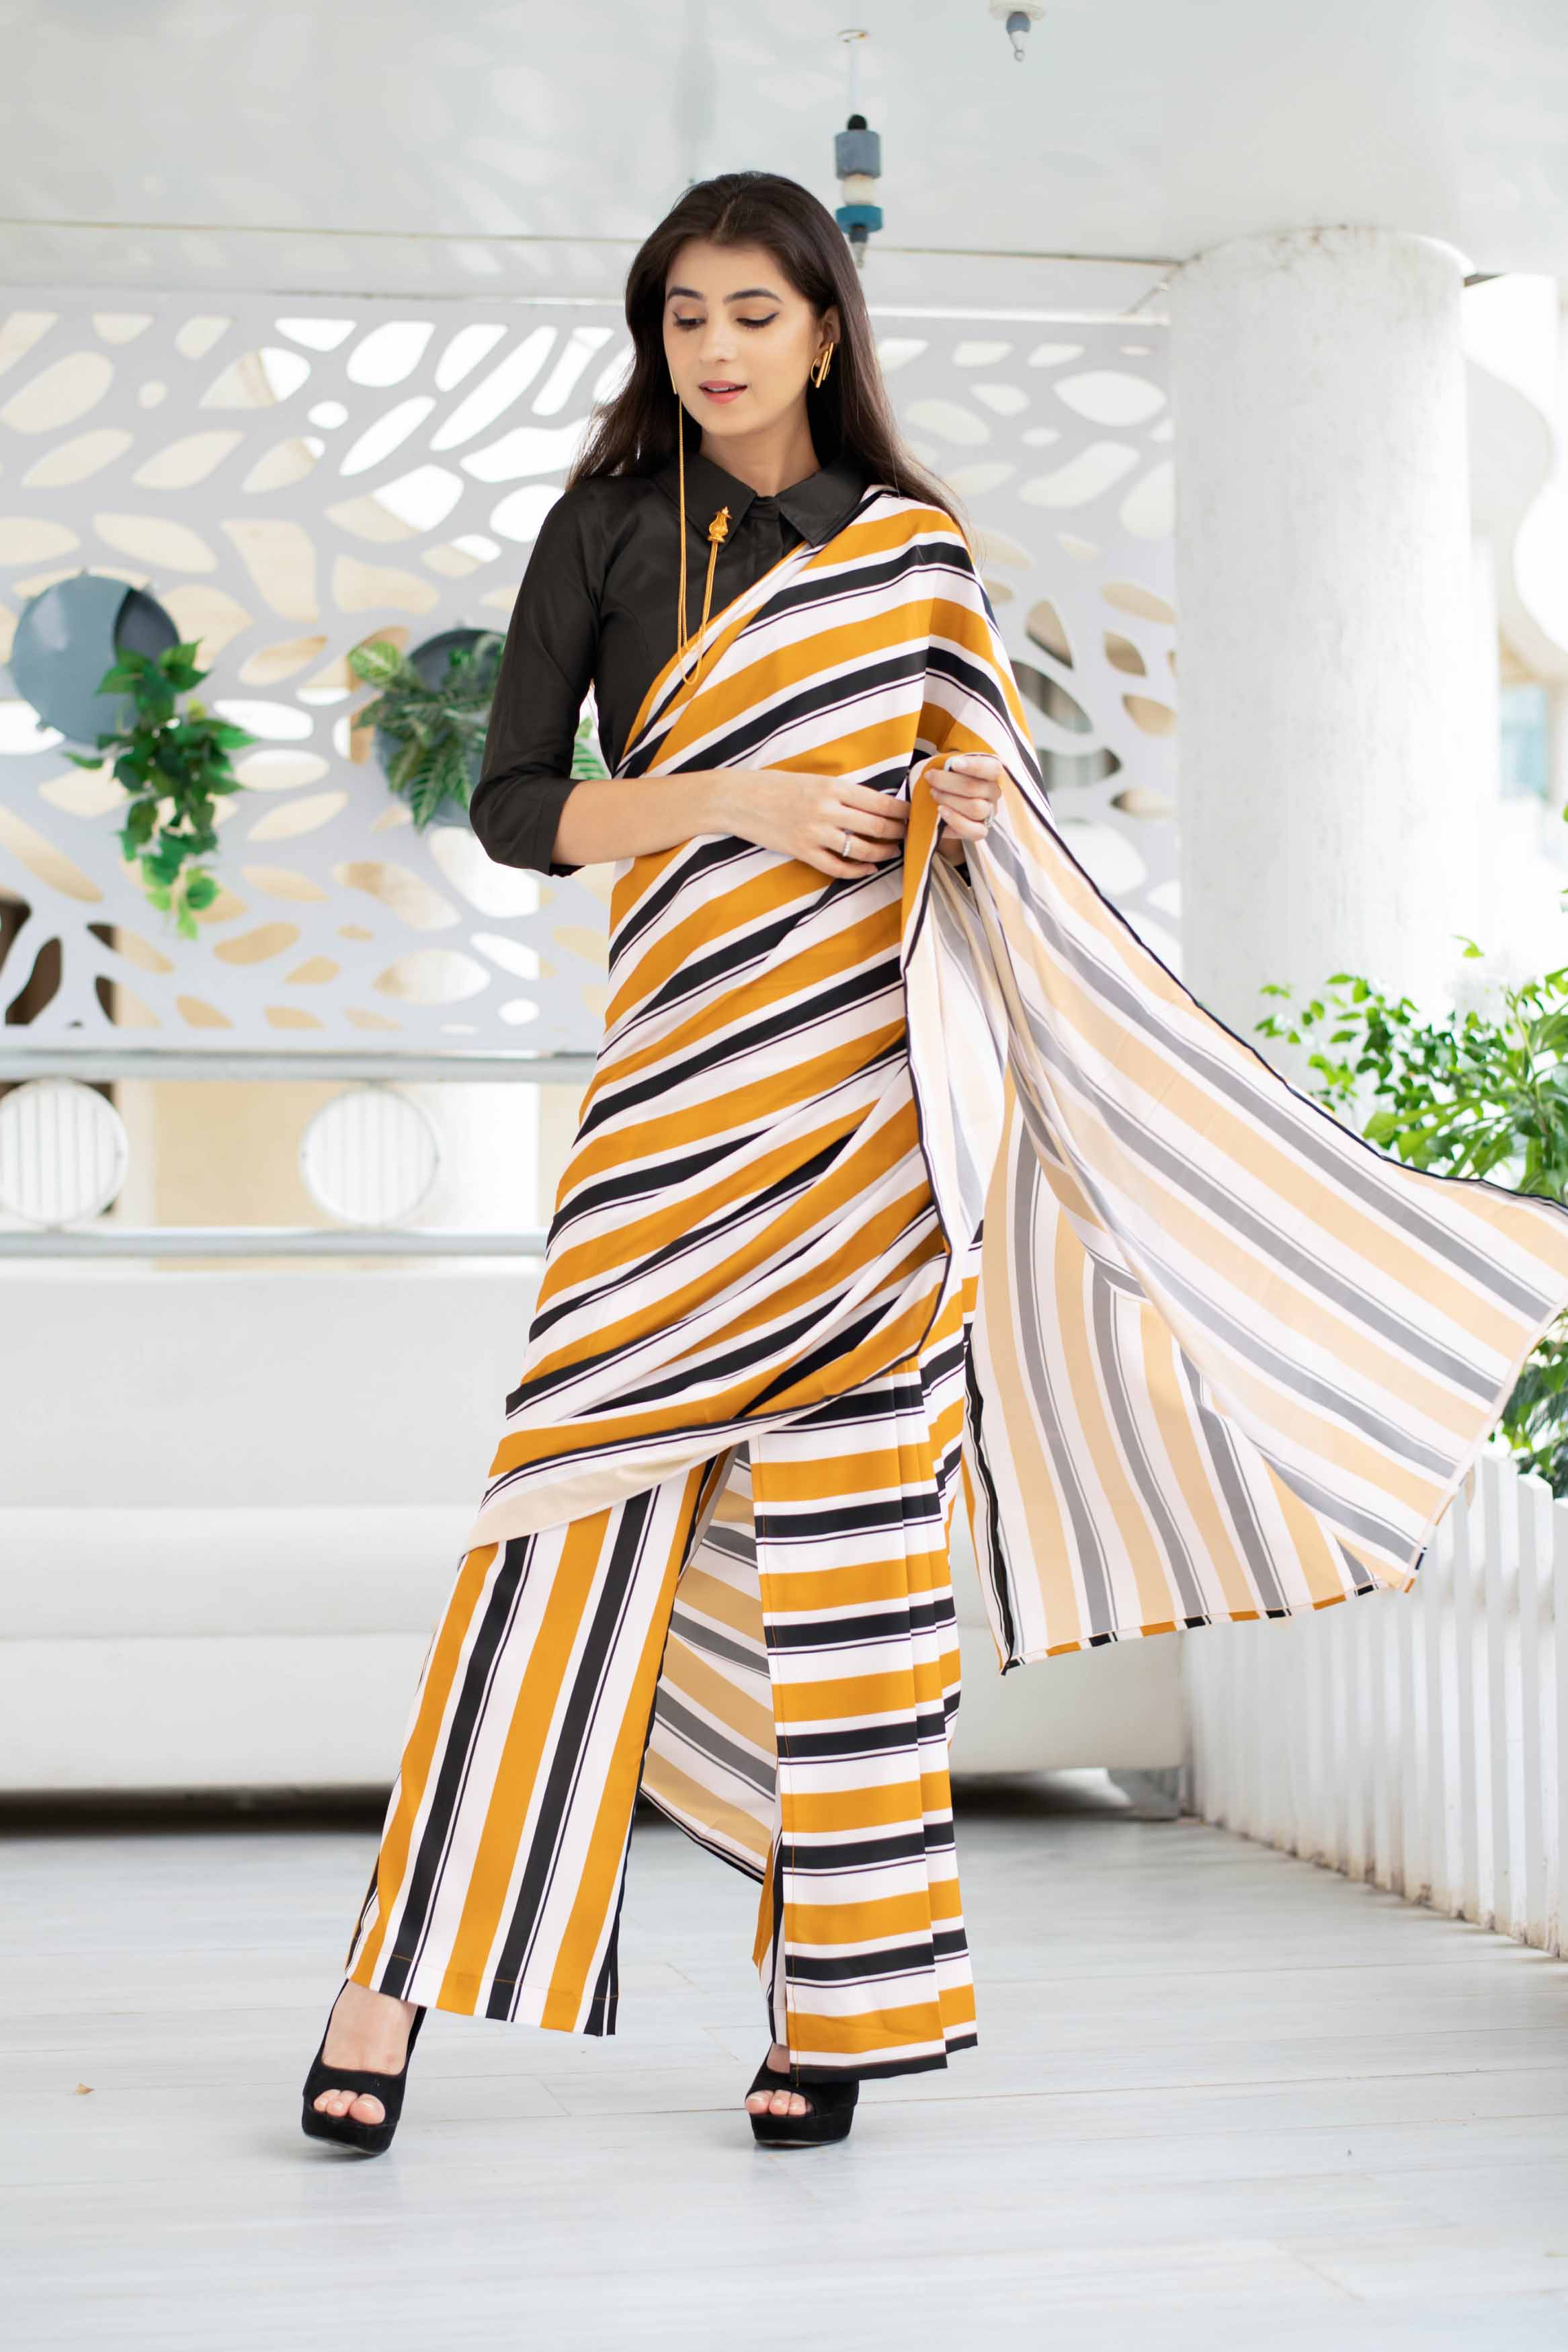 Women's Stripped Pant Styled Saree With Blouse - Label Shaurya Sanadhya